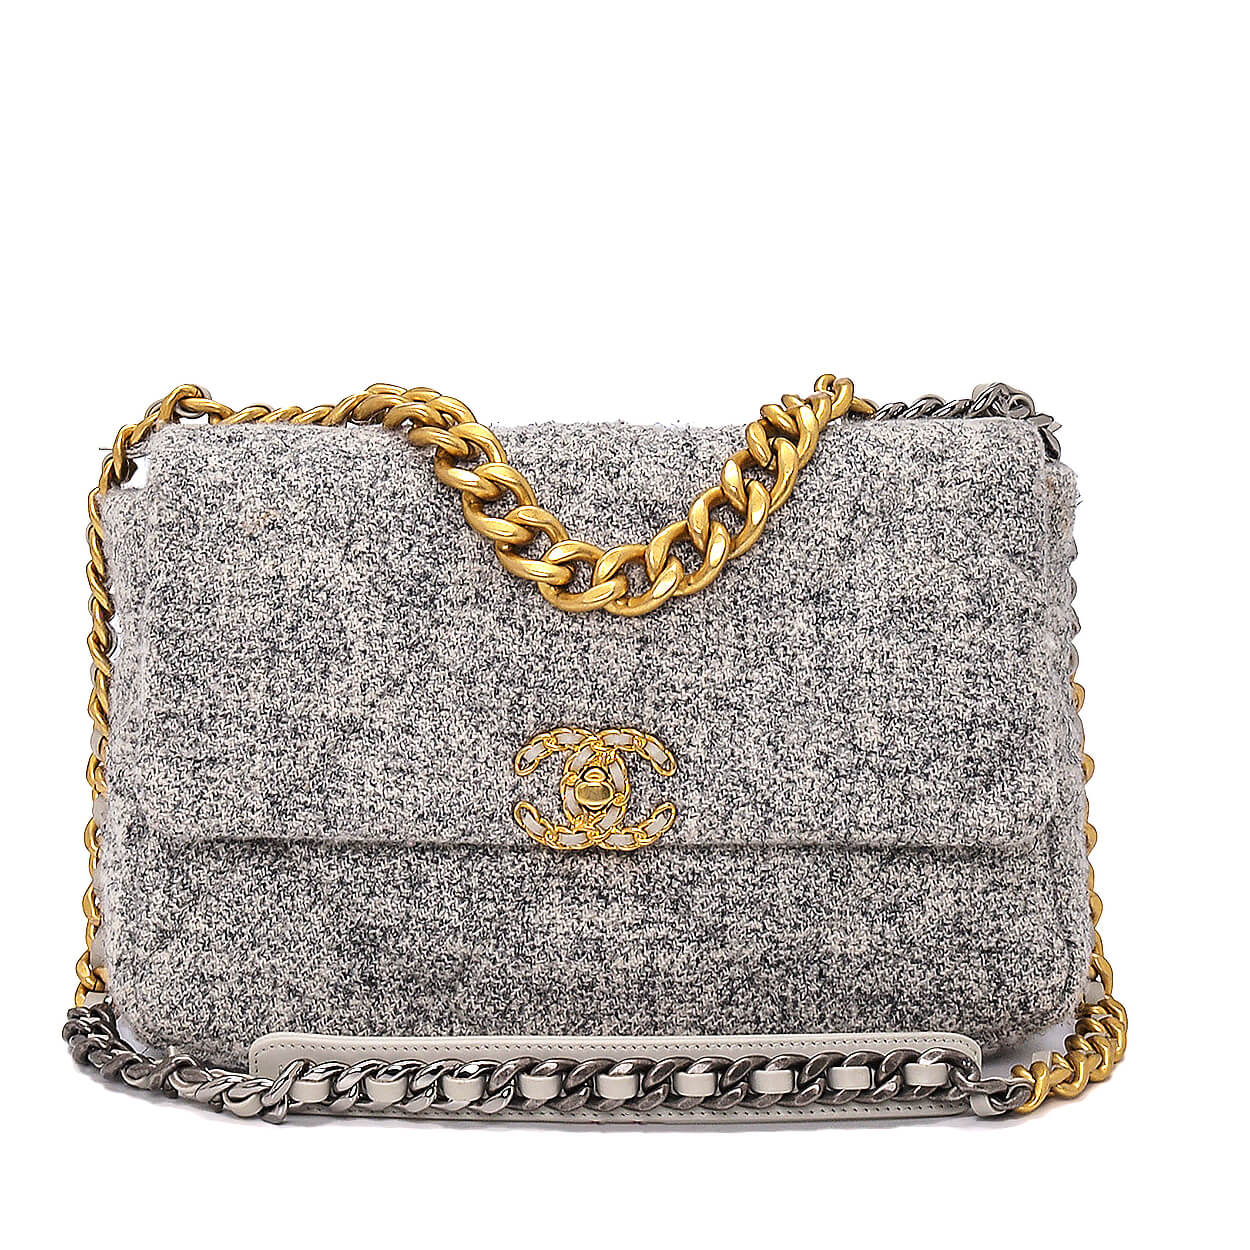 Chanel - Grey Quilted Wool Tweed No 19 Flap Bag 